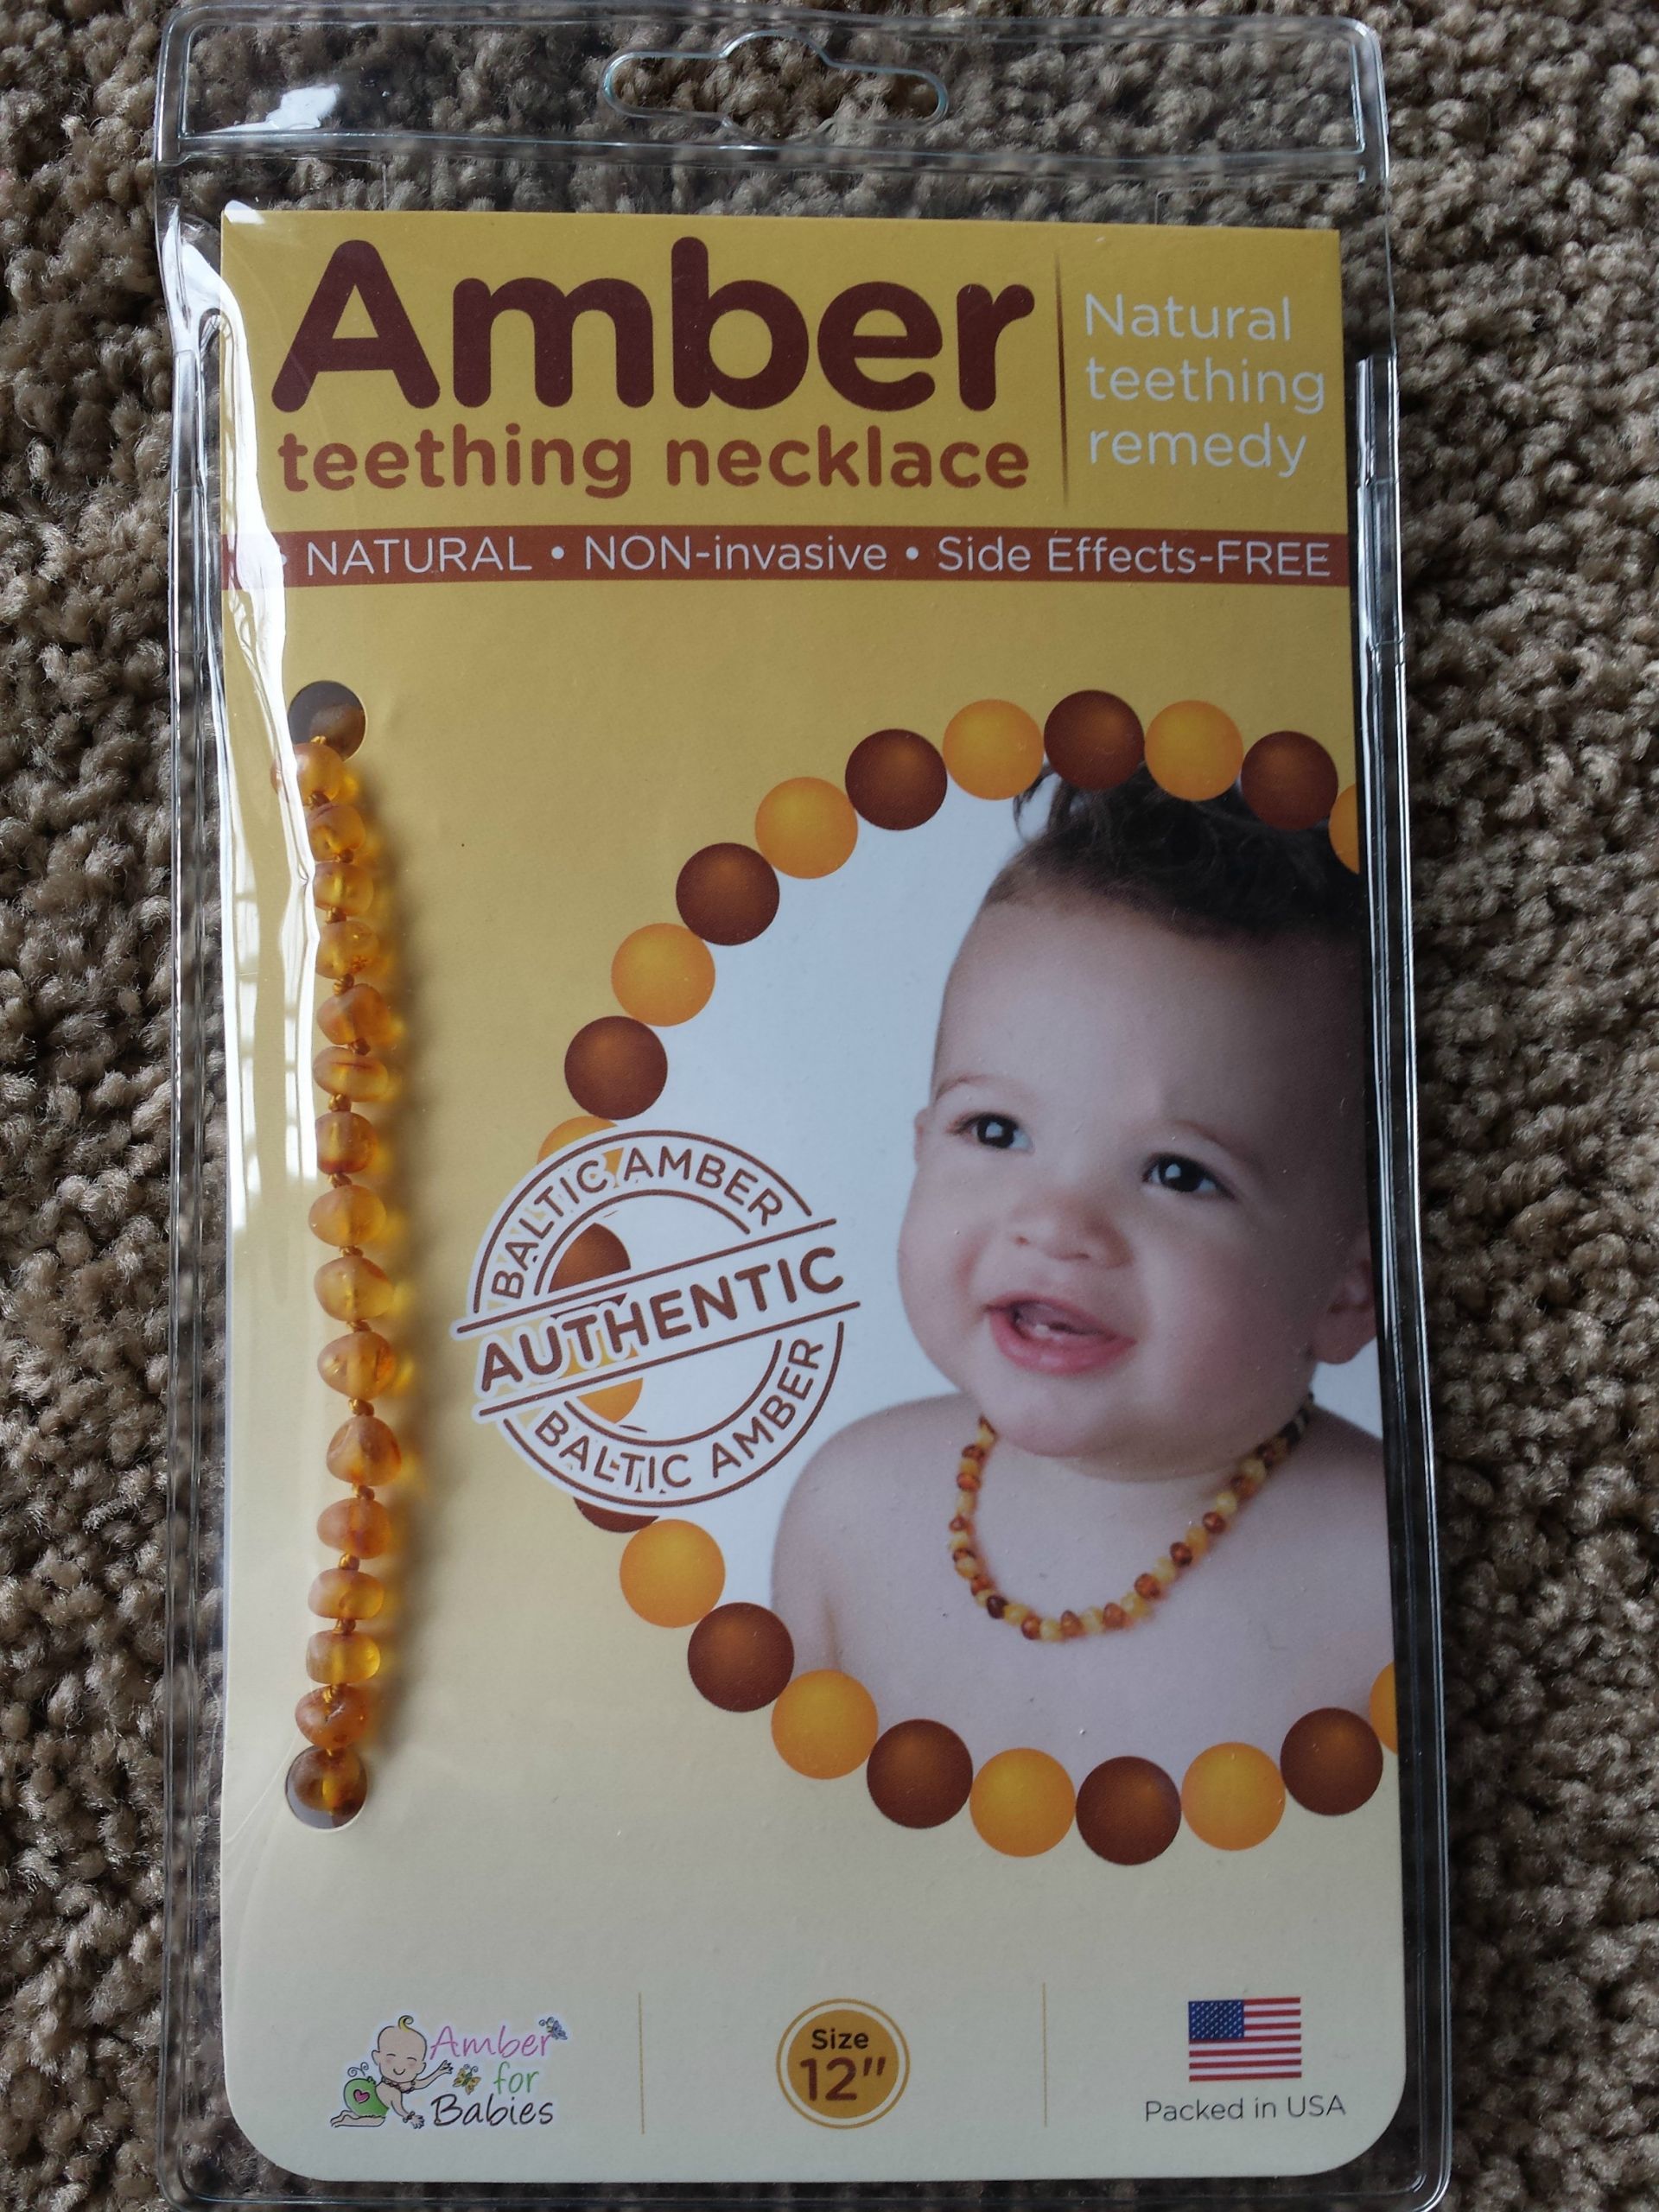 Amber Teething Necklace Review
 Product Review & Giveaway Amber Teething Necklace